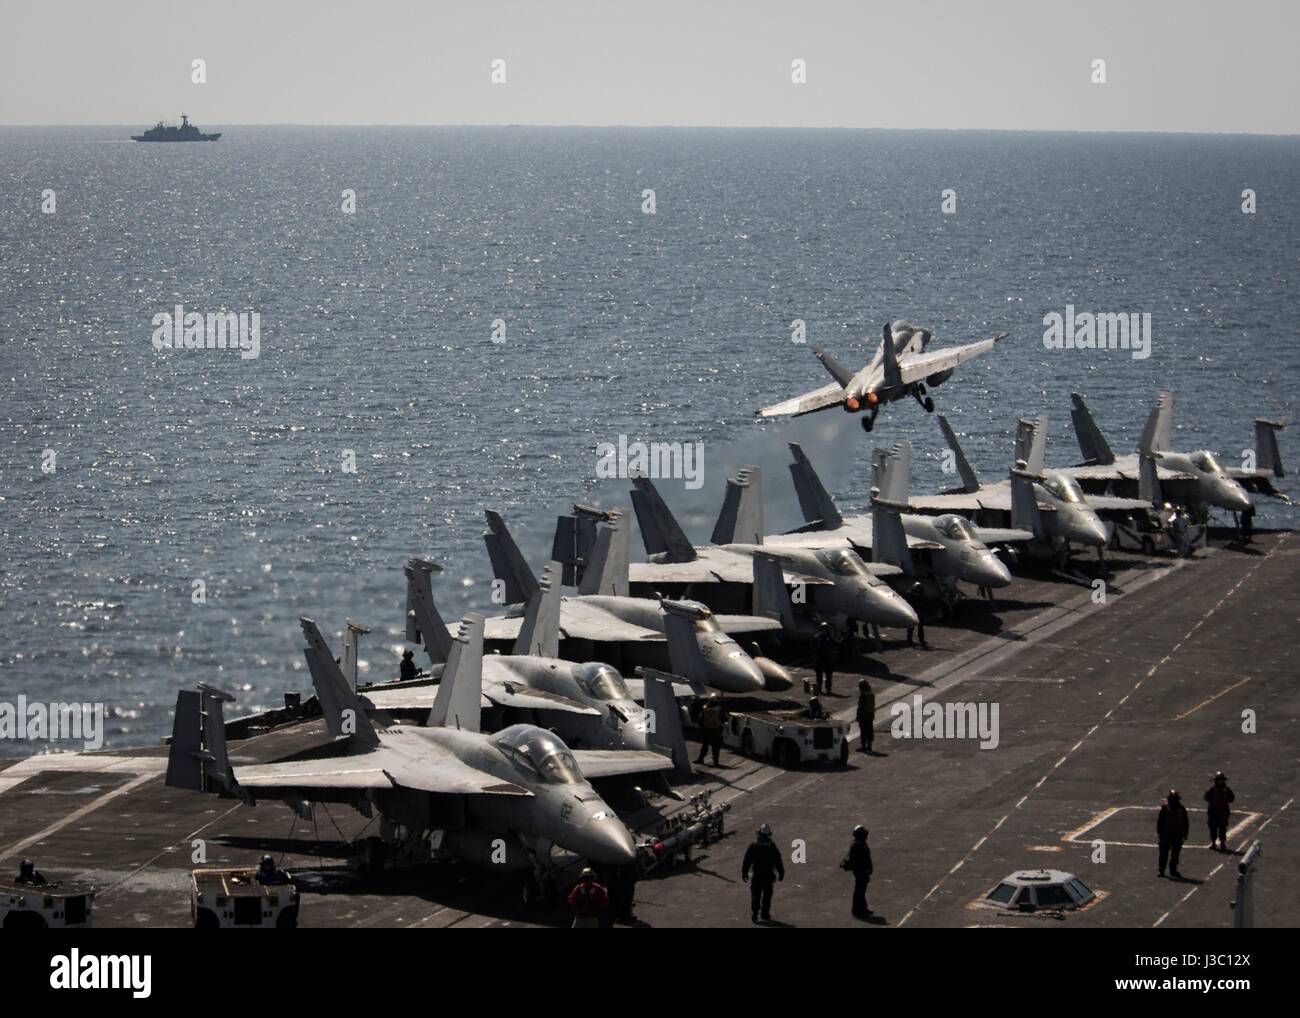 A U.S. Navy F/A-18C Super Hornet fighter from the Blue Blasters of Strike Fighter Squadron 34 takes off from the flight deck of the Nimitz-class aircraft carrier USS Carl Vinson underway with an escort of U.S. and South Korean warships during patrol May 2, 2017 off the coast of Korea. Stock Photo